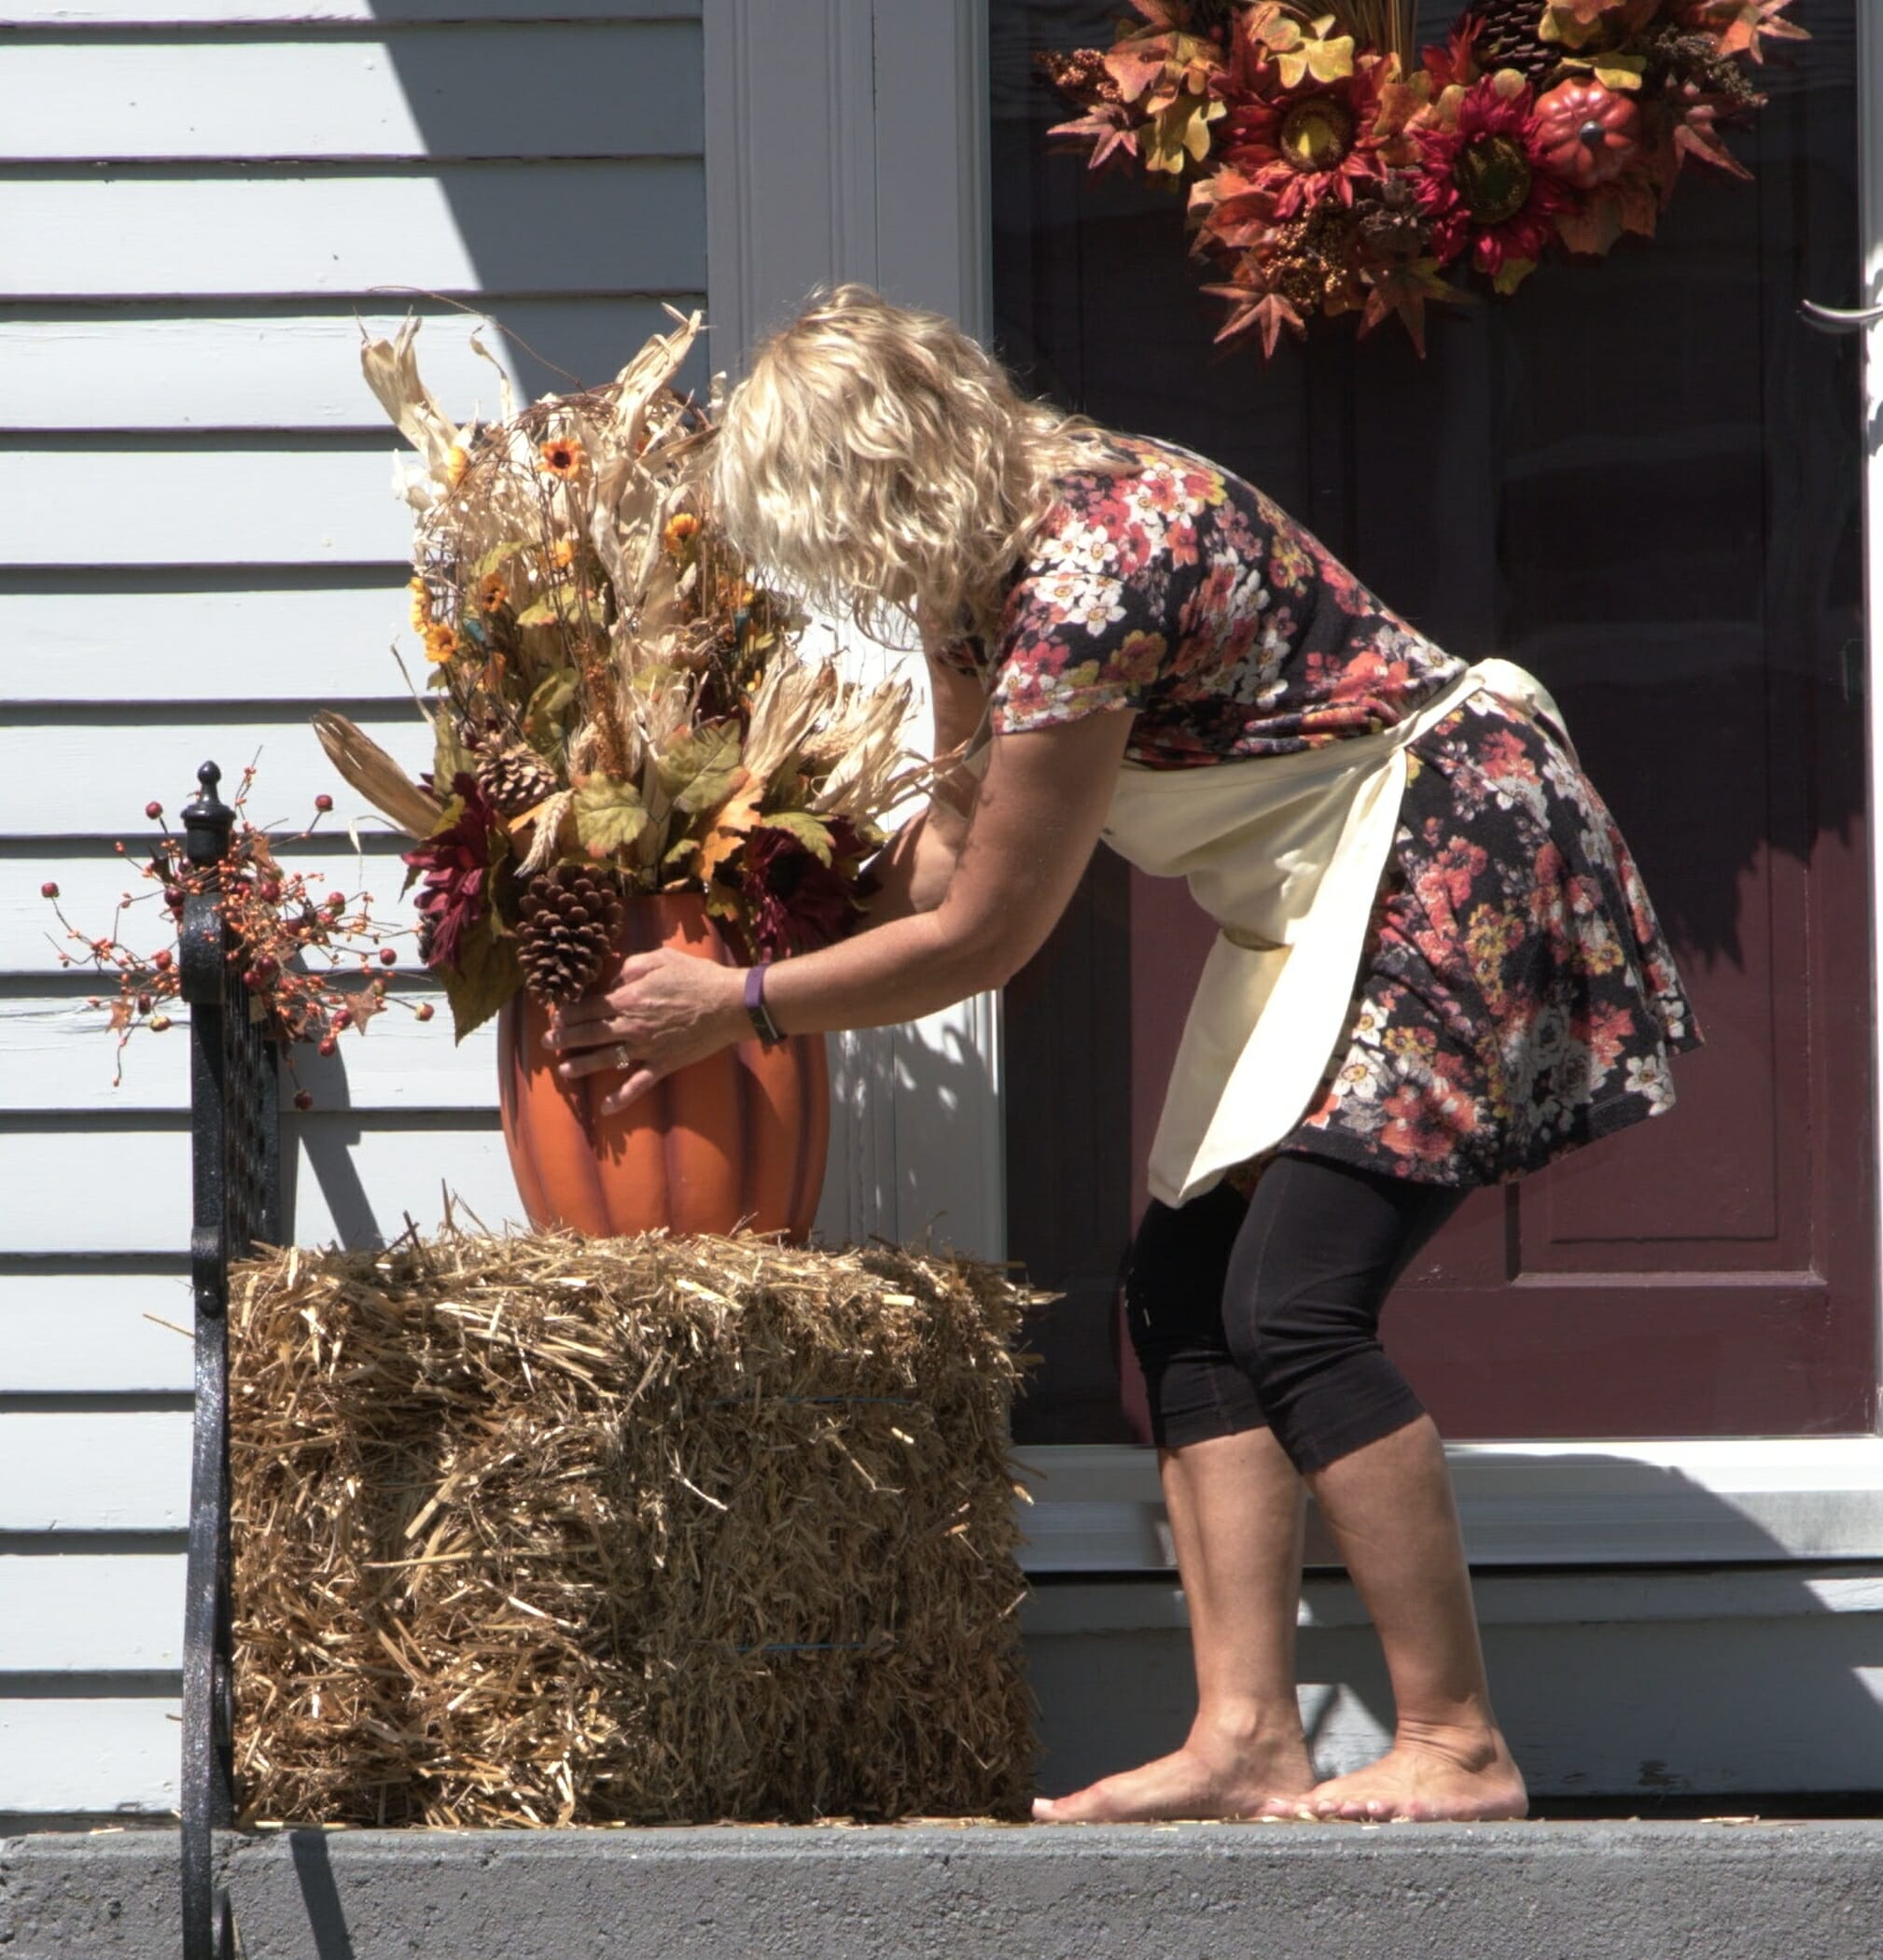 woman arranging a pumpkin planter full of corn husks pine cones and other fall décor on top of a bale of straw